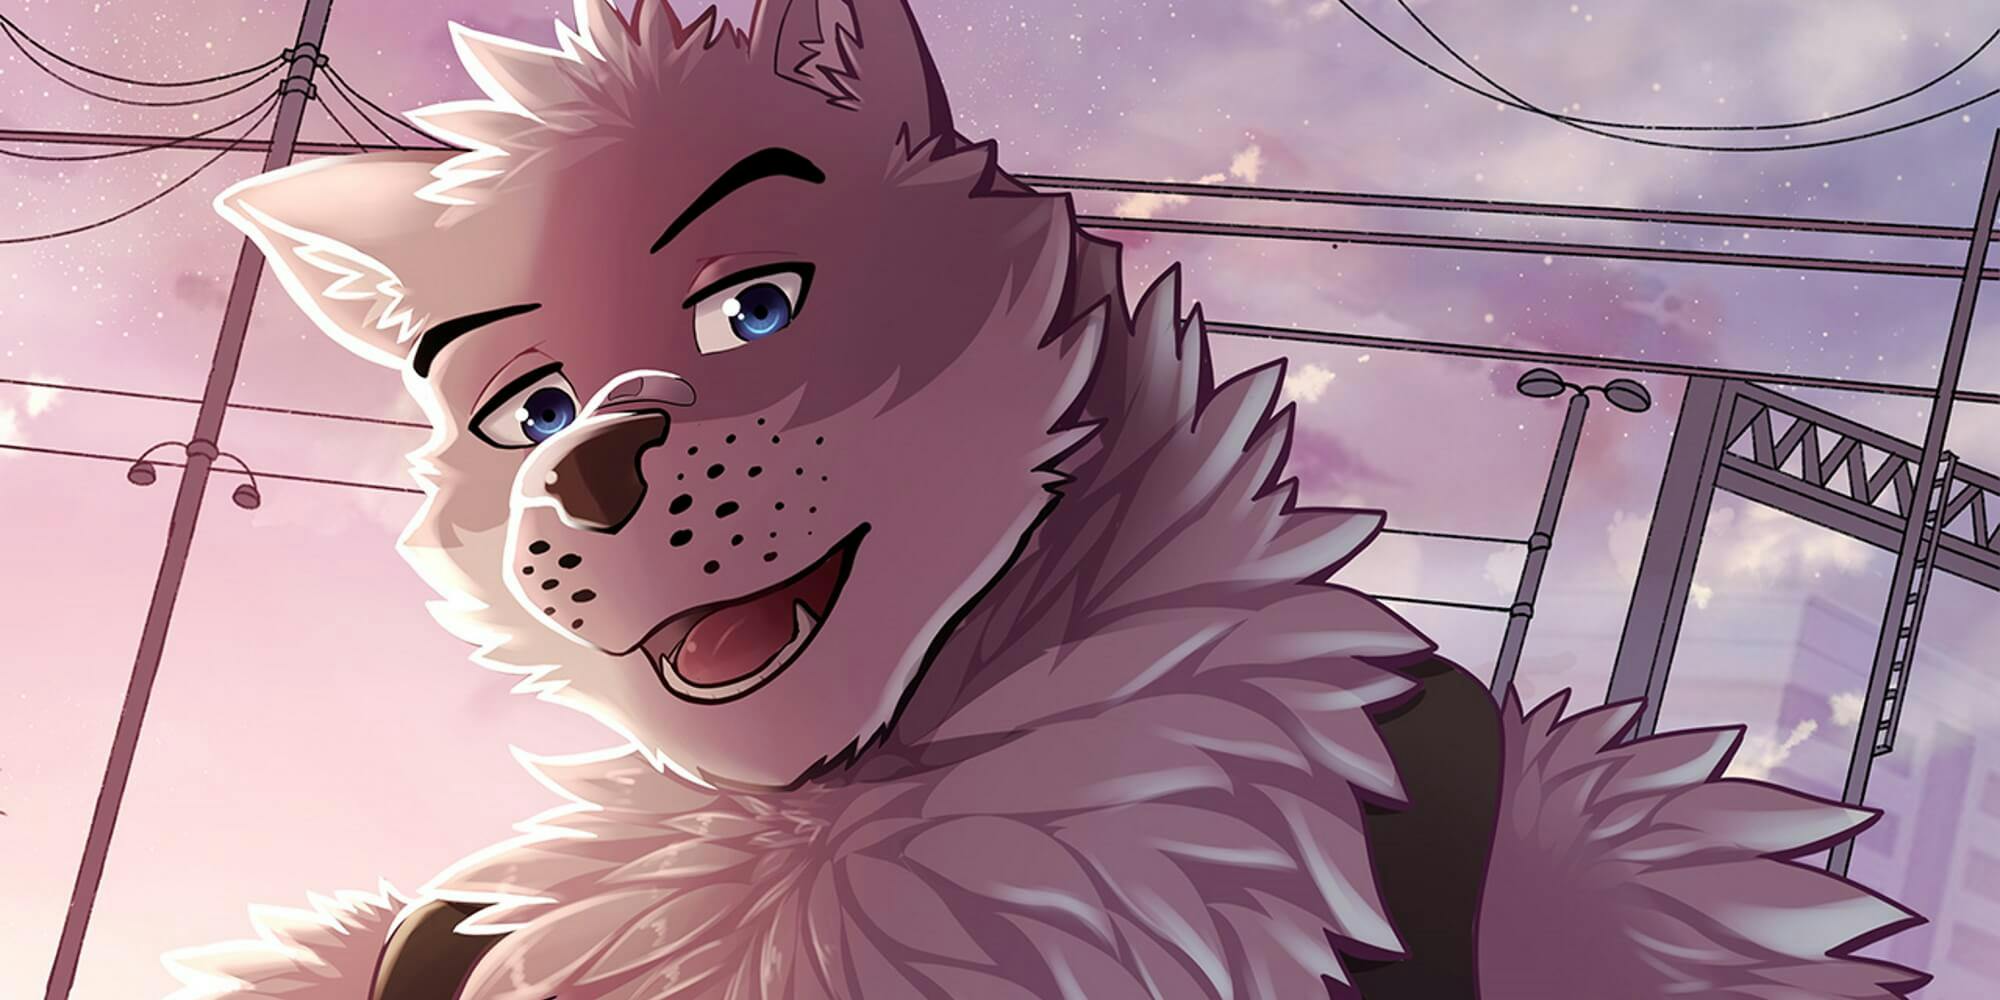 Meet the queer boys of your dreams in this NSFW gay furry visual novel